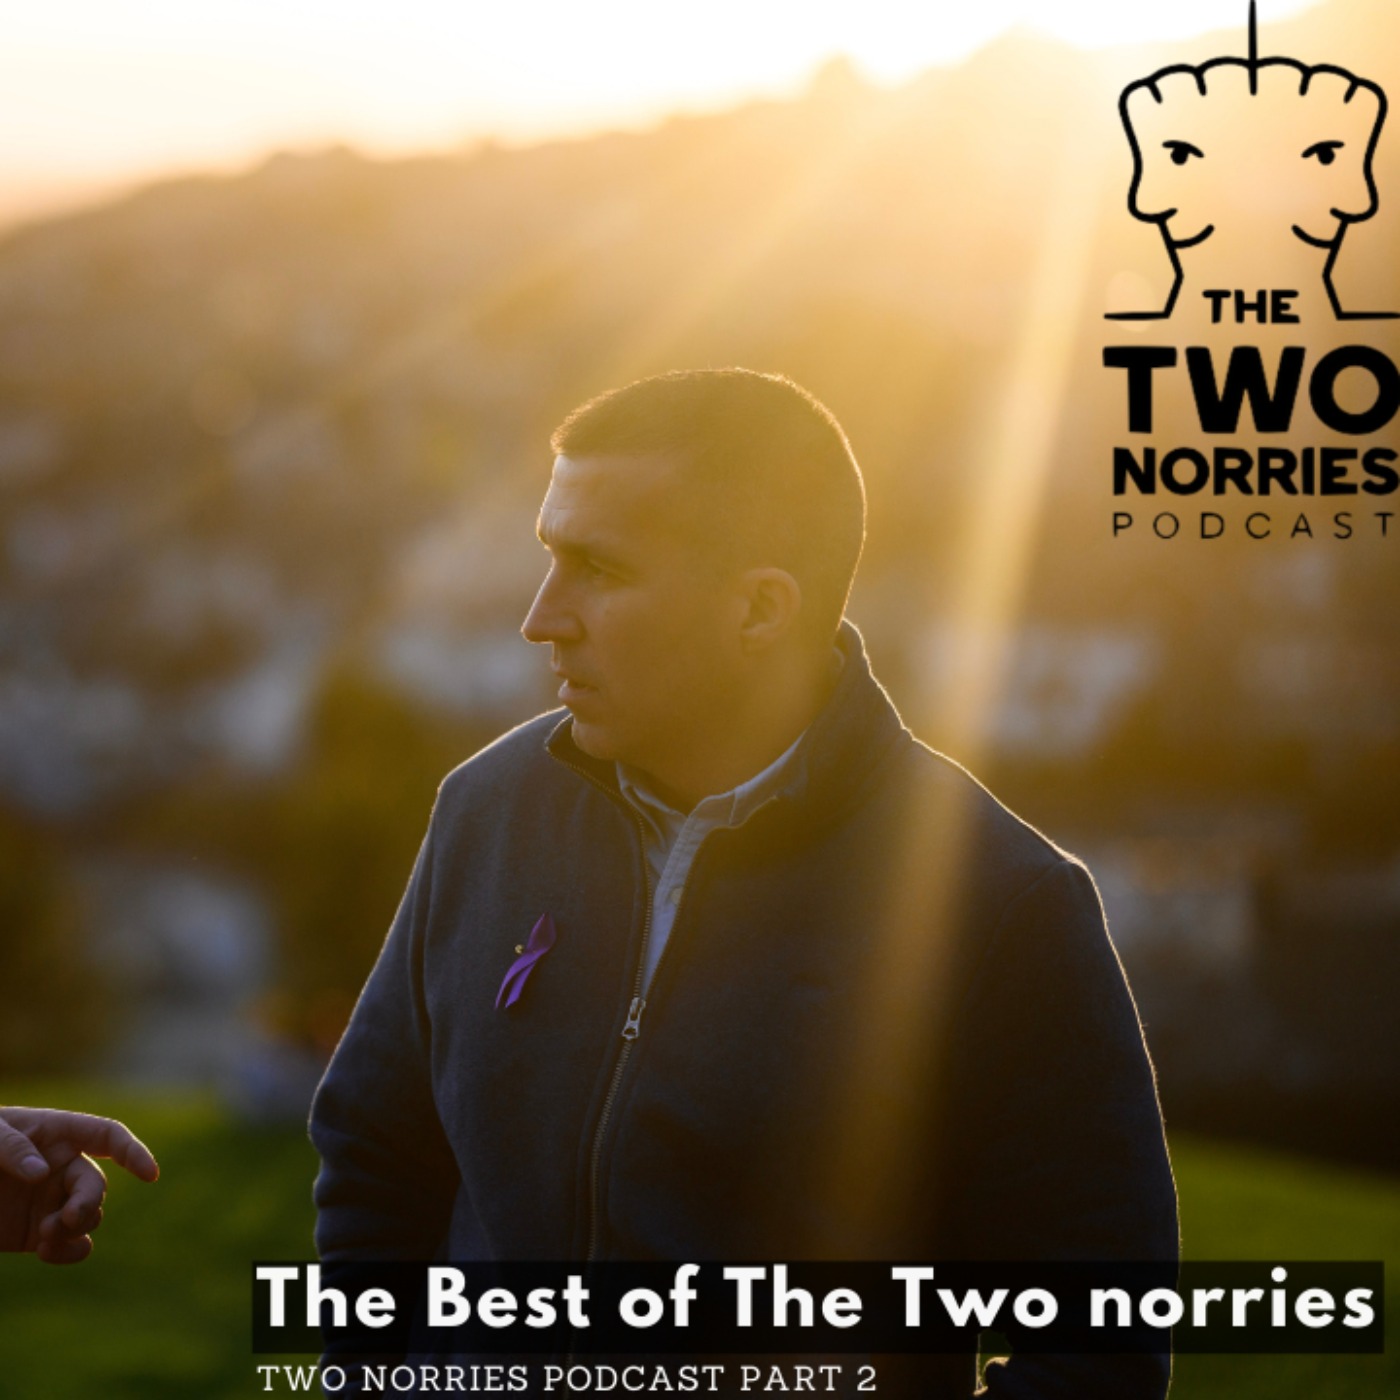 #190 The Two Norries Podcast - Best of Episode Part 2